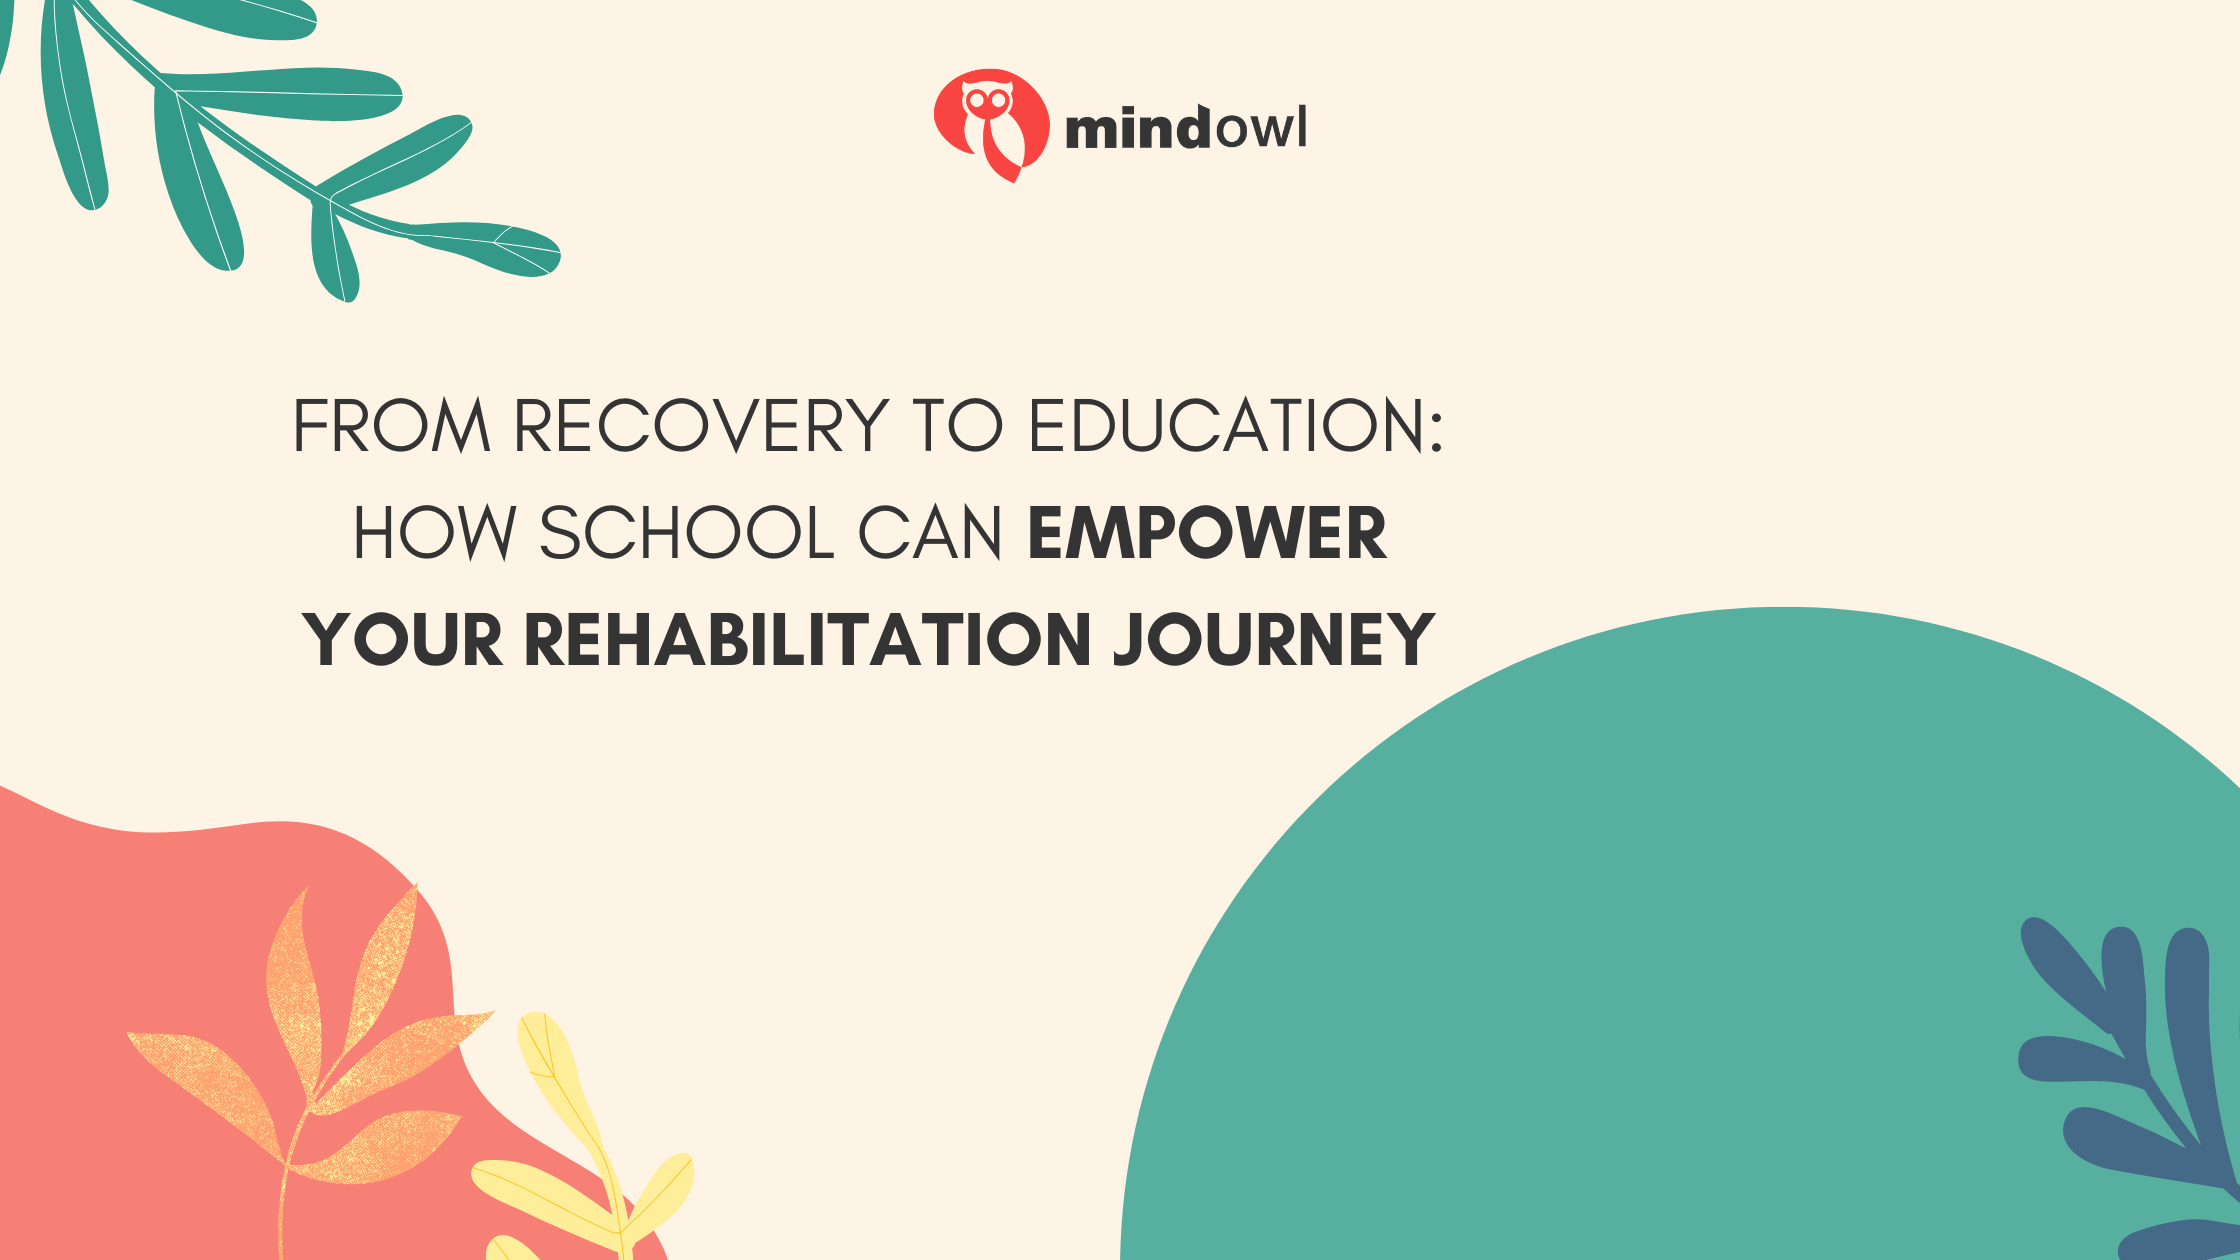 From Recovery to Education: How School Can Empower Your Rehabilitation Journey